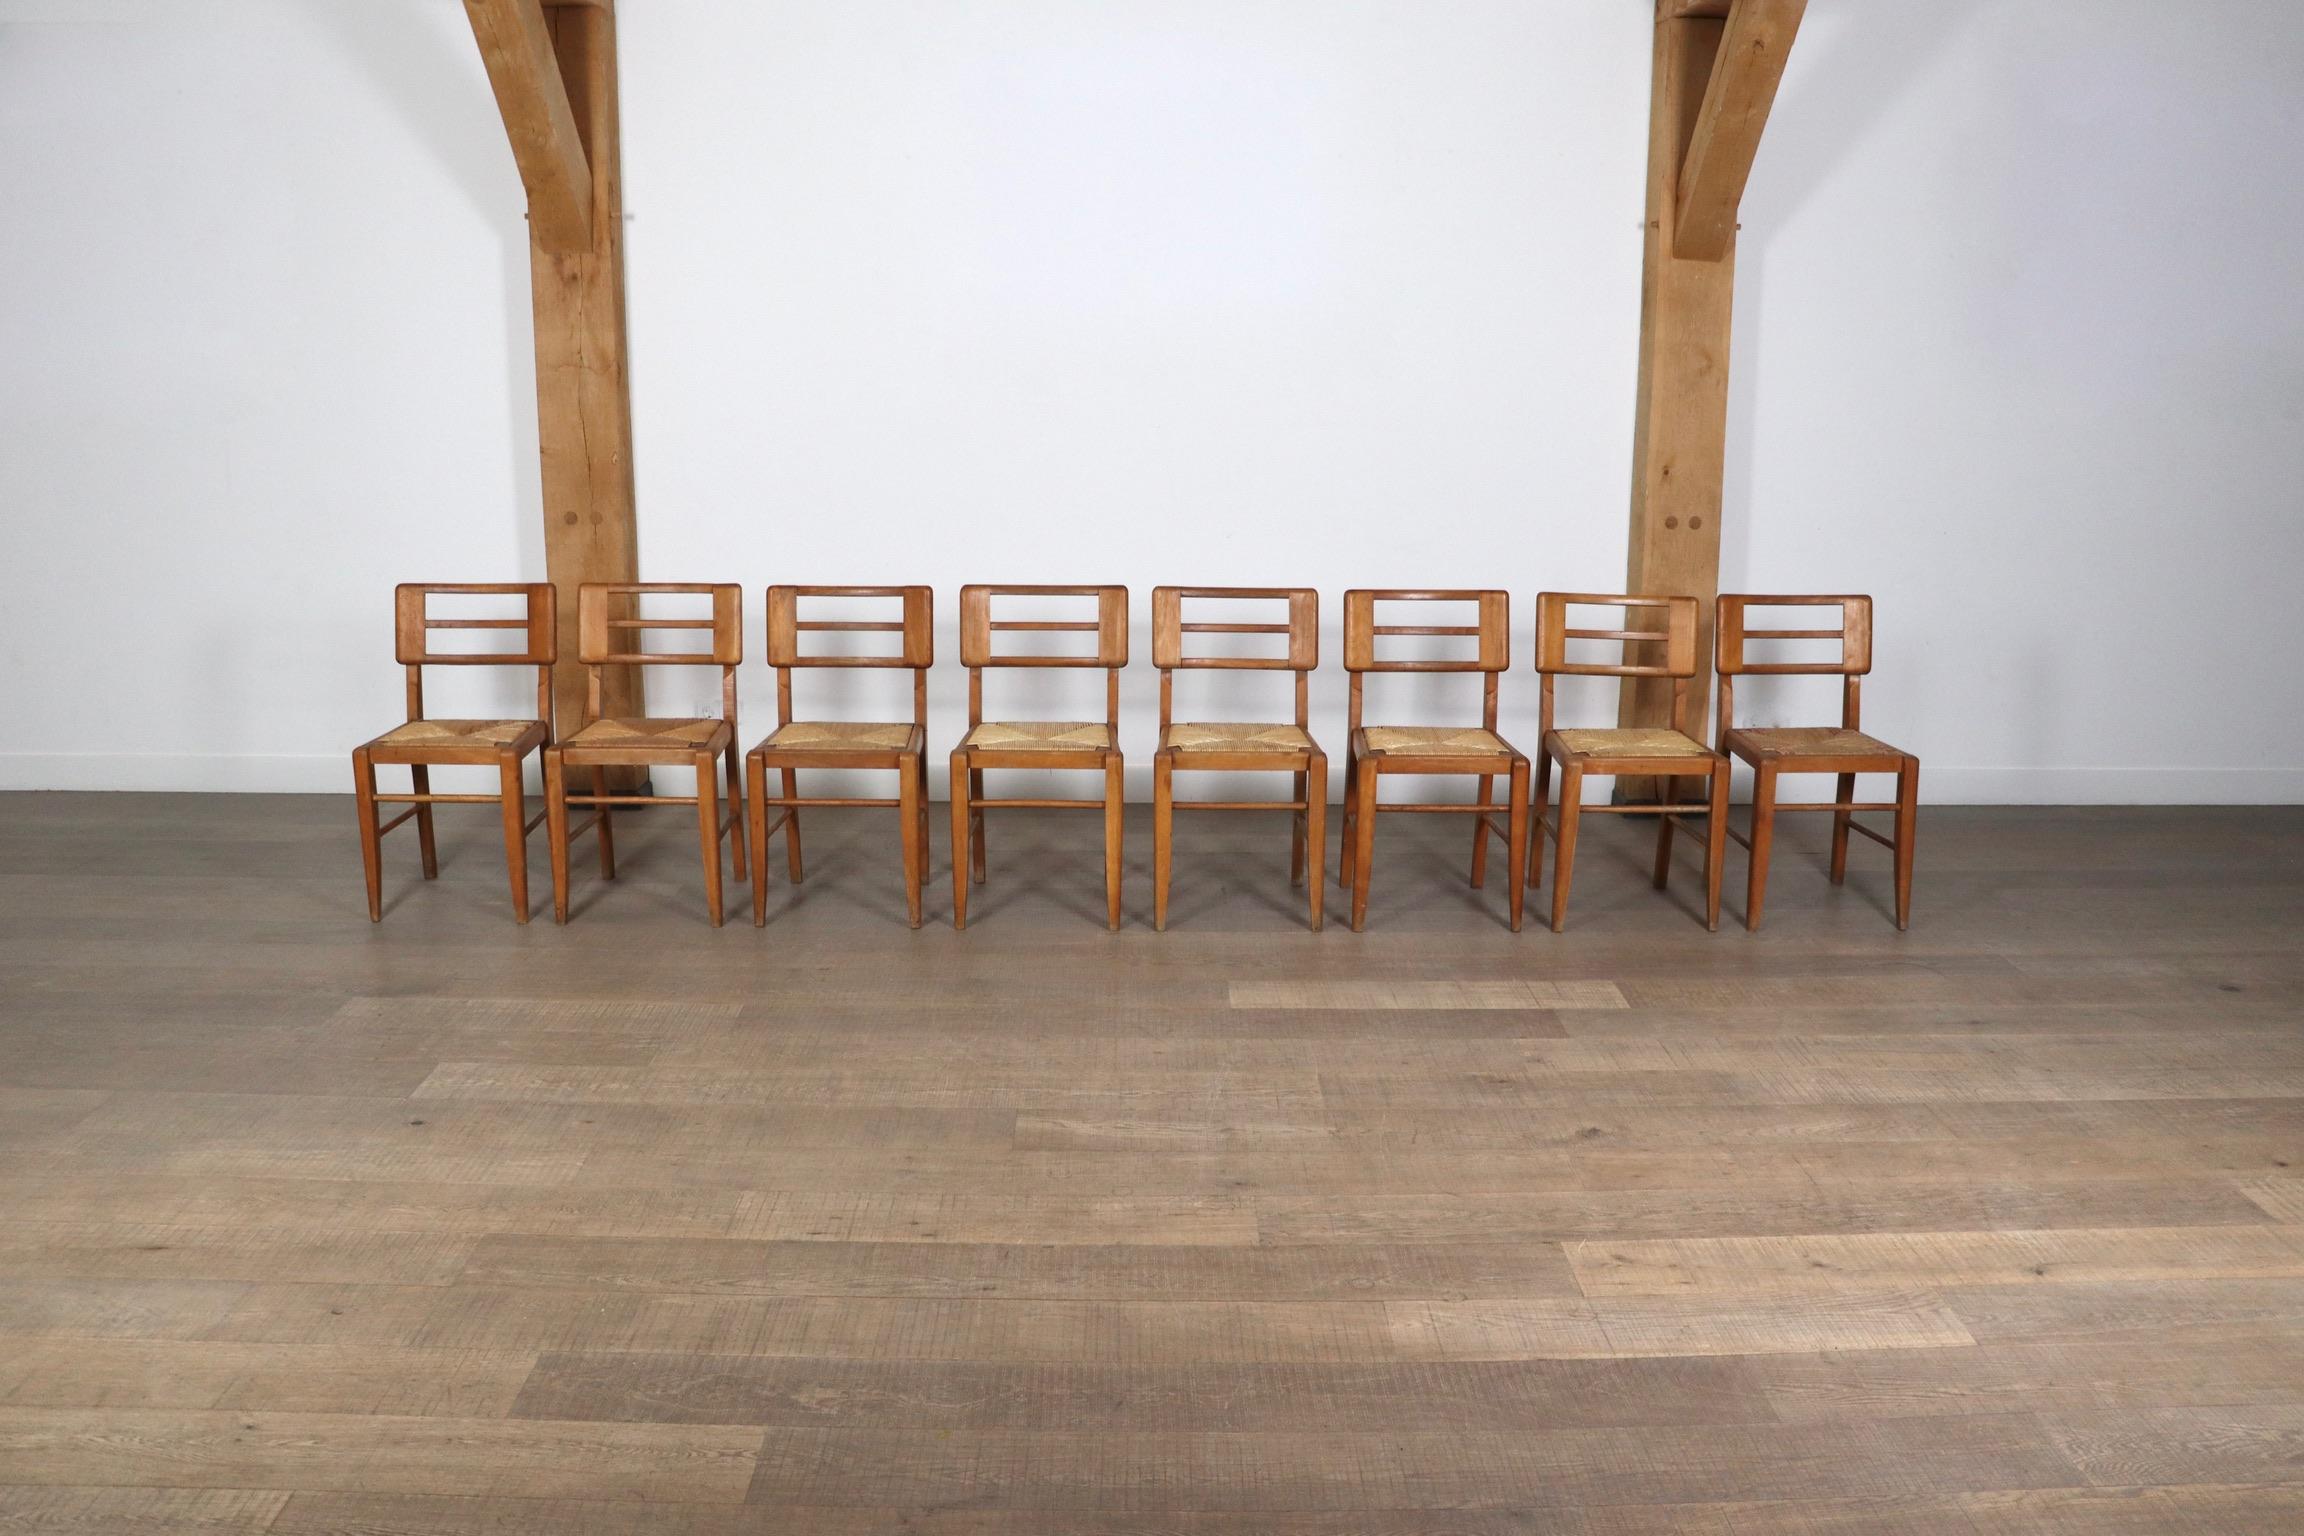 Indulge in the timeless elegance of French craftsmanship with this exquisite set of eight dining chairs by French designer and architect Pierre Cruège (1913-2003), crafted in oak and straw in the 1950s.

Cruège’s fusion of modernist principles with